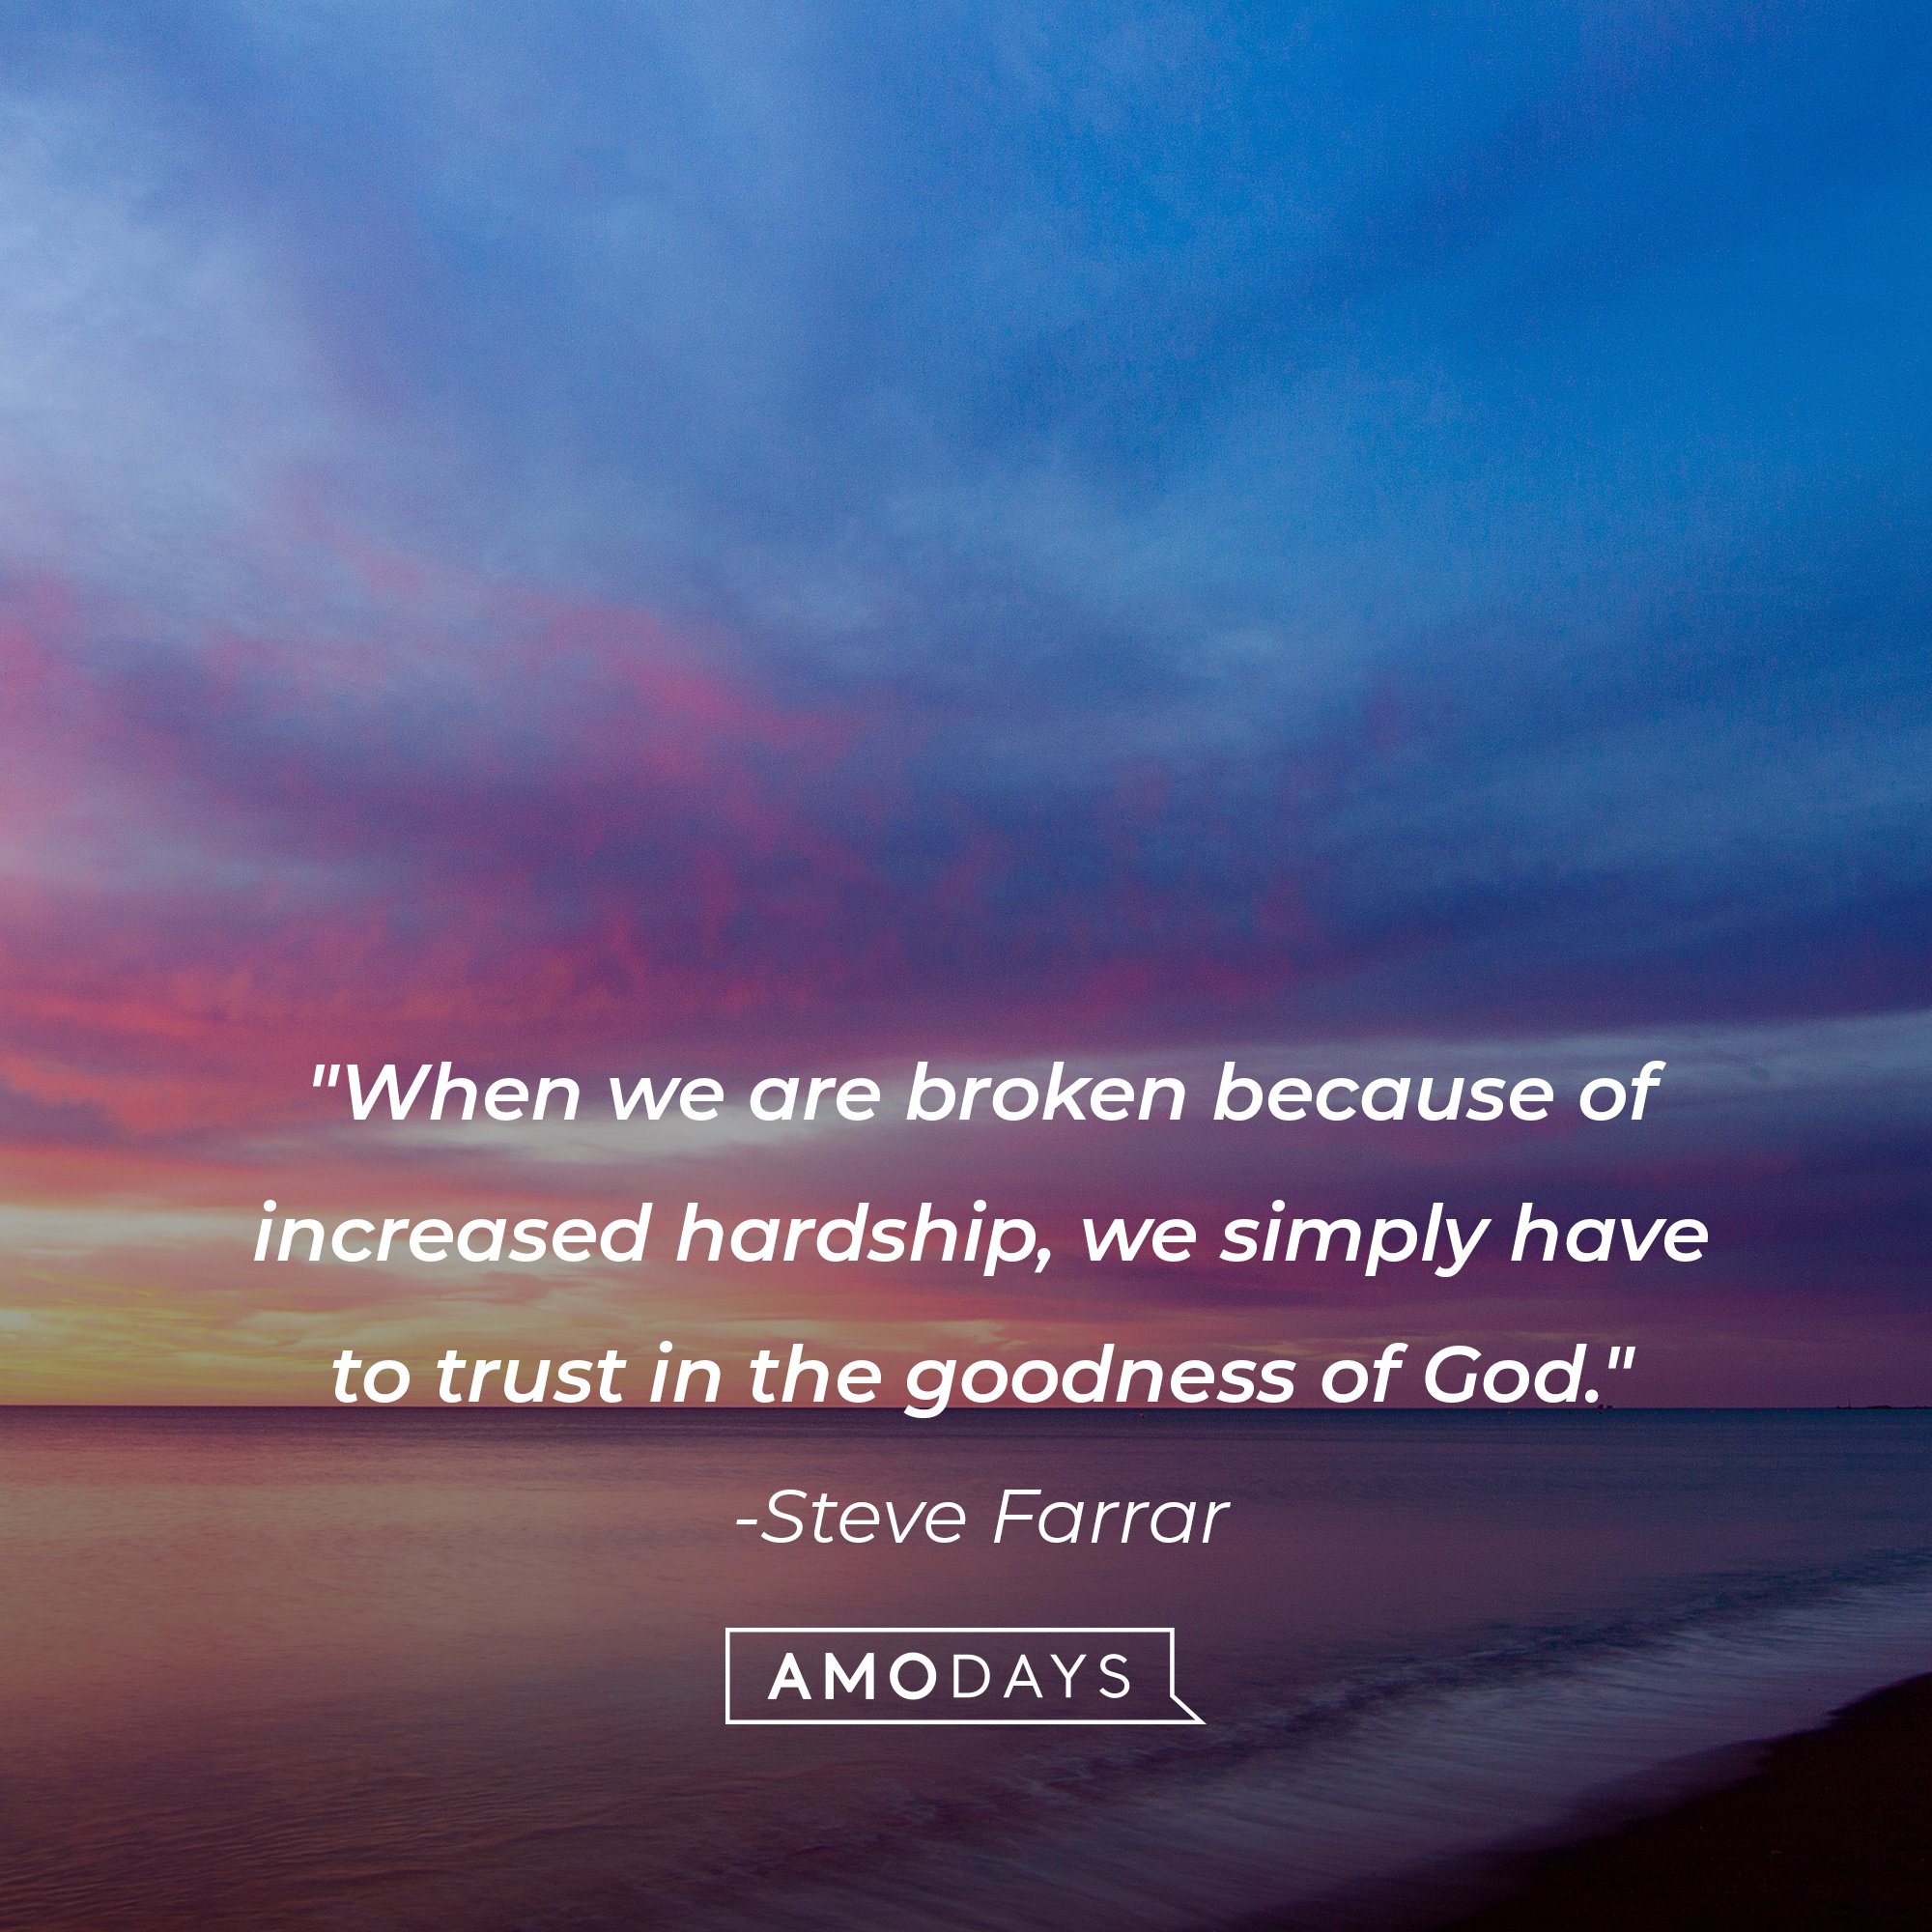 Steve Farrar’s quote: "When we are broken because of increased hardship, we simply have to trust in the goodness of God." | Image: AmoDays